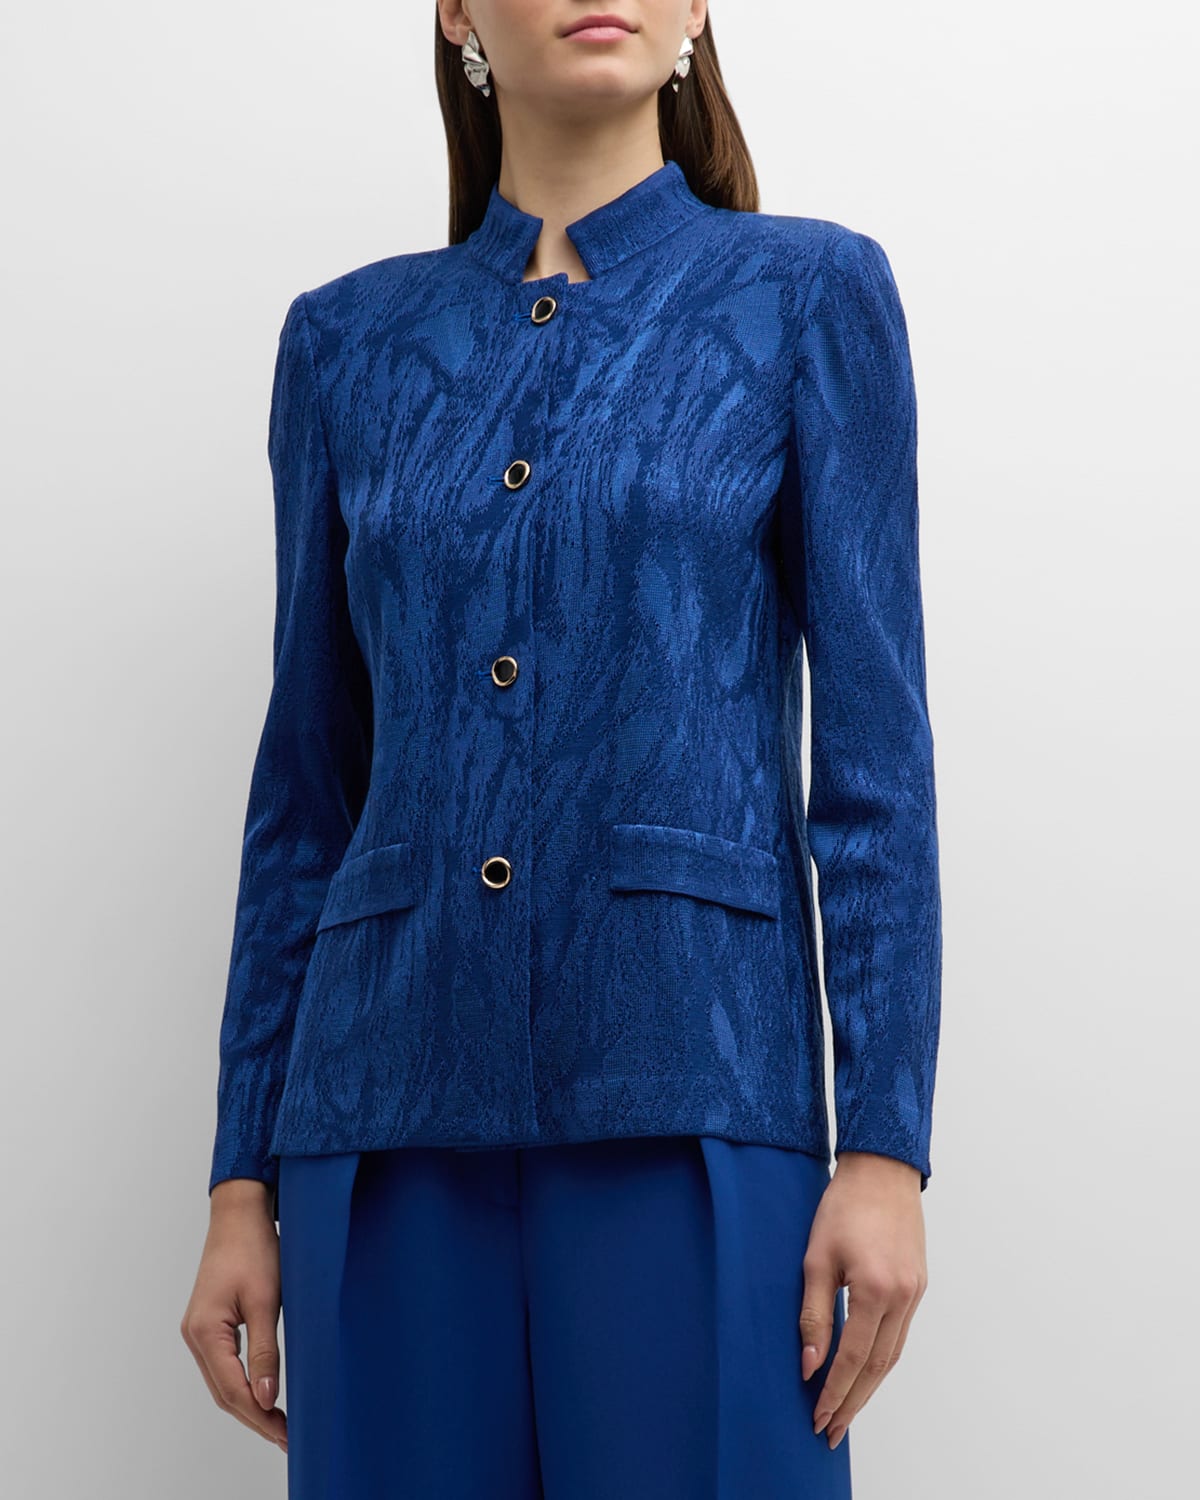 MISOOK TAILORED BUTTON-DOWN JACQUARD KNIT JACKET